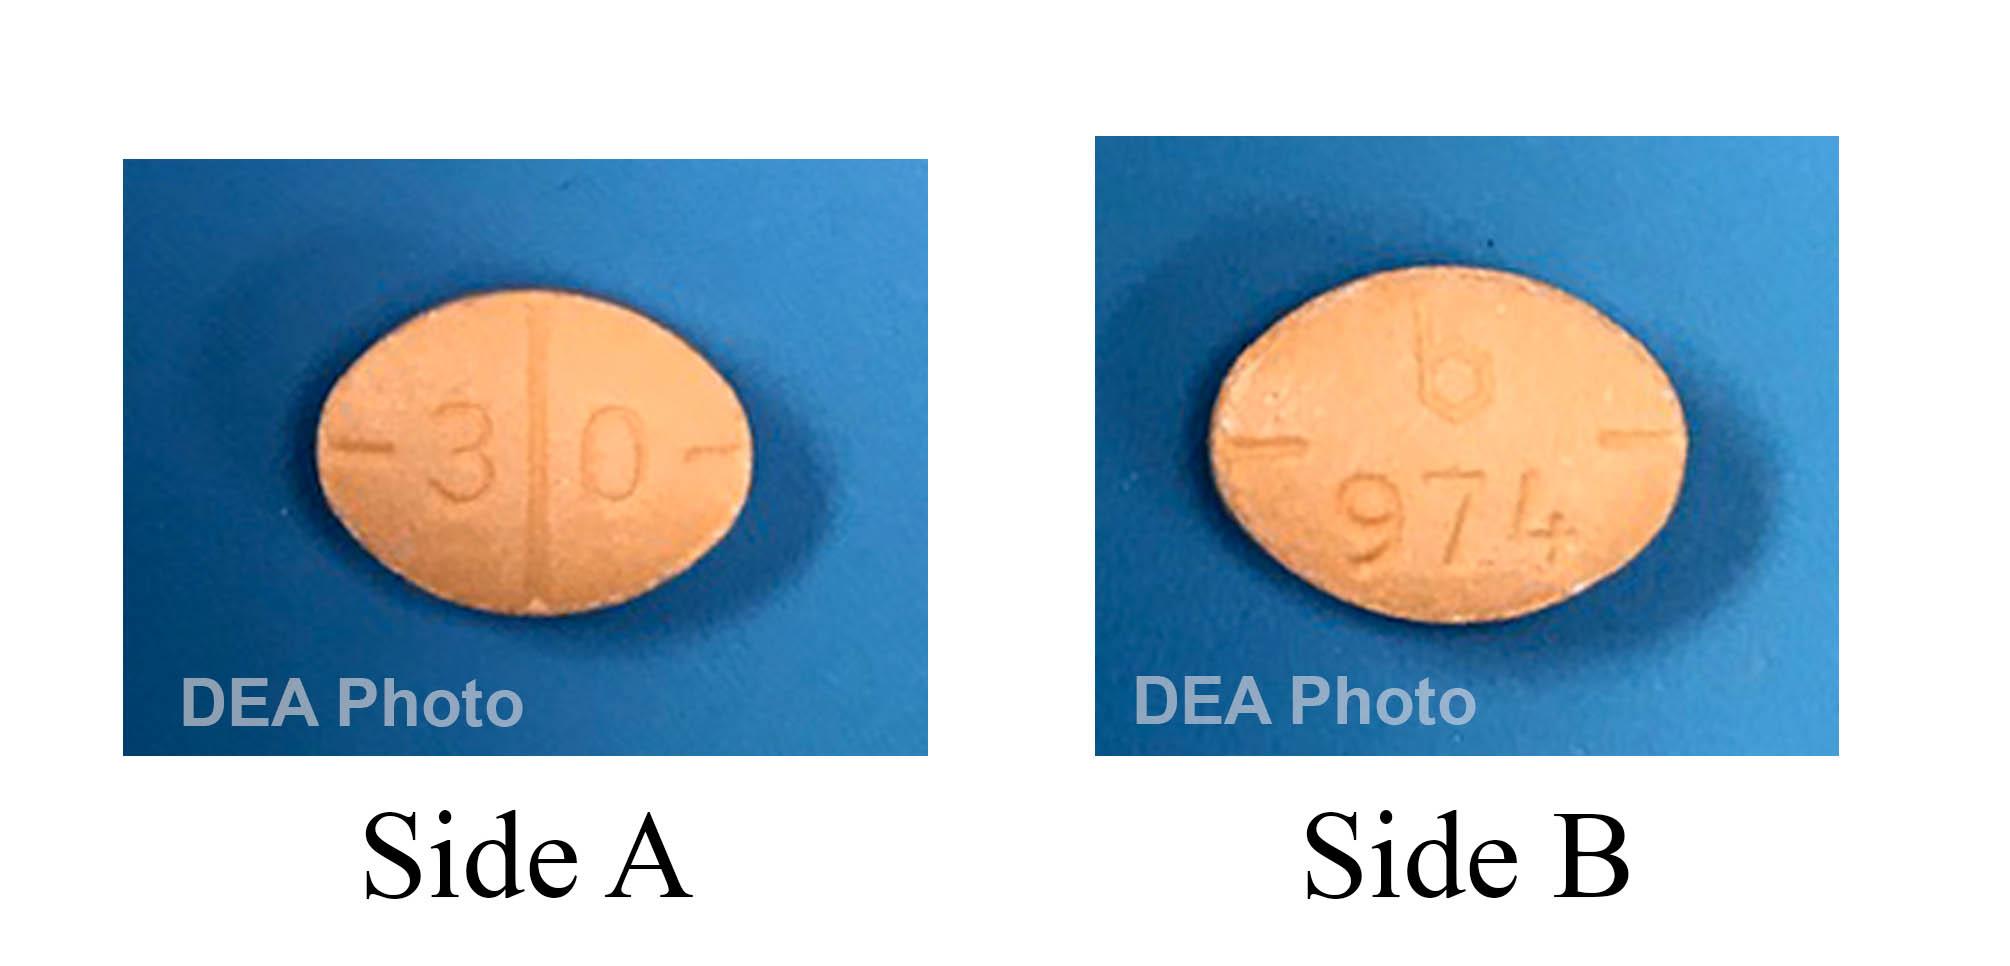 Dea Issues Warning Over Counterfeit Pills